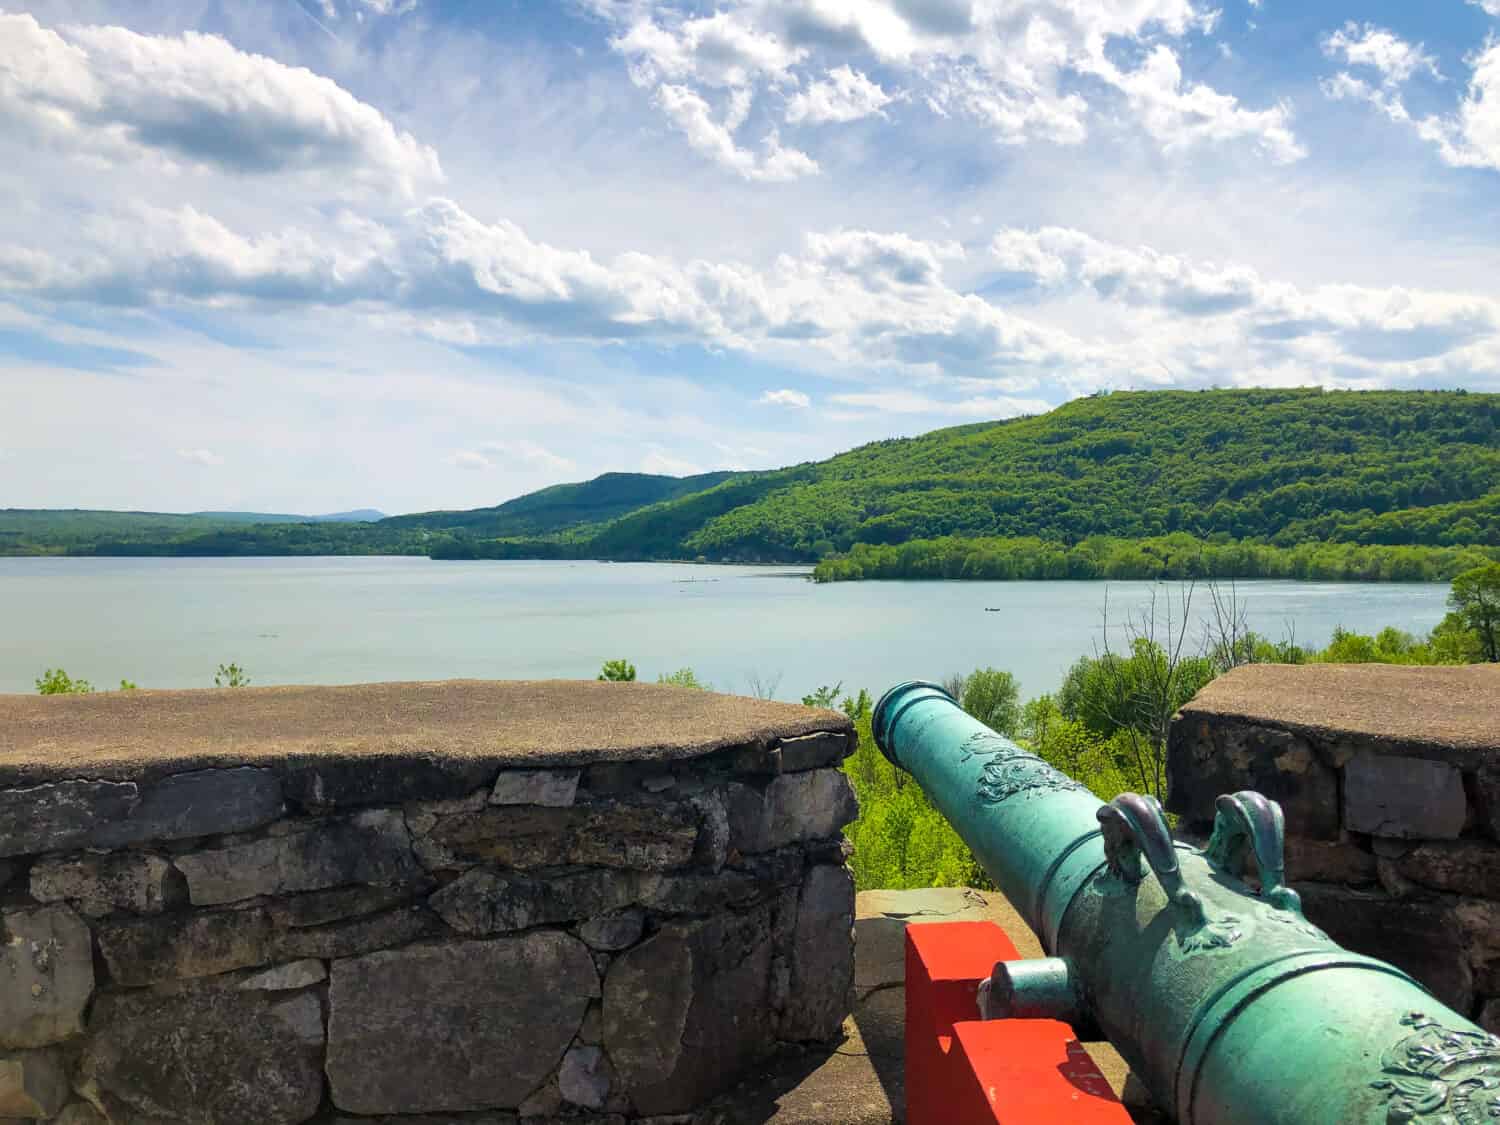 Cannon at Fort Ticonderoga pointing out at Lake Champlain